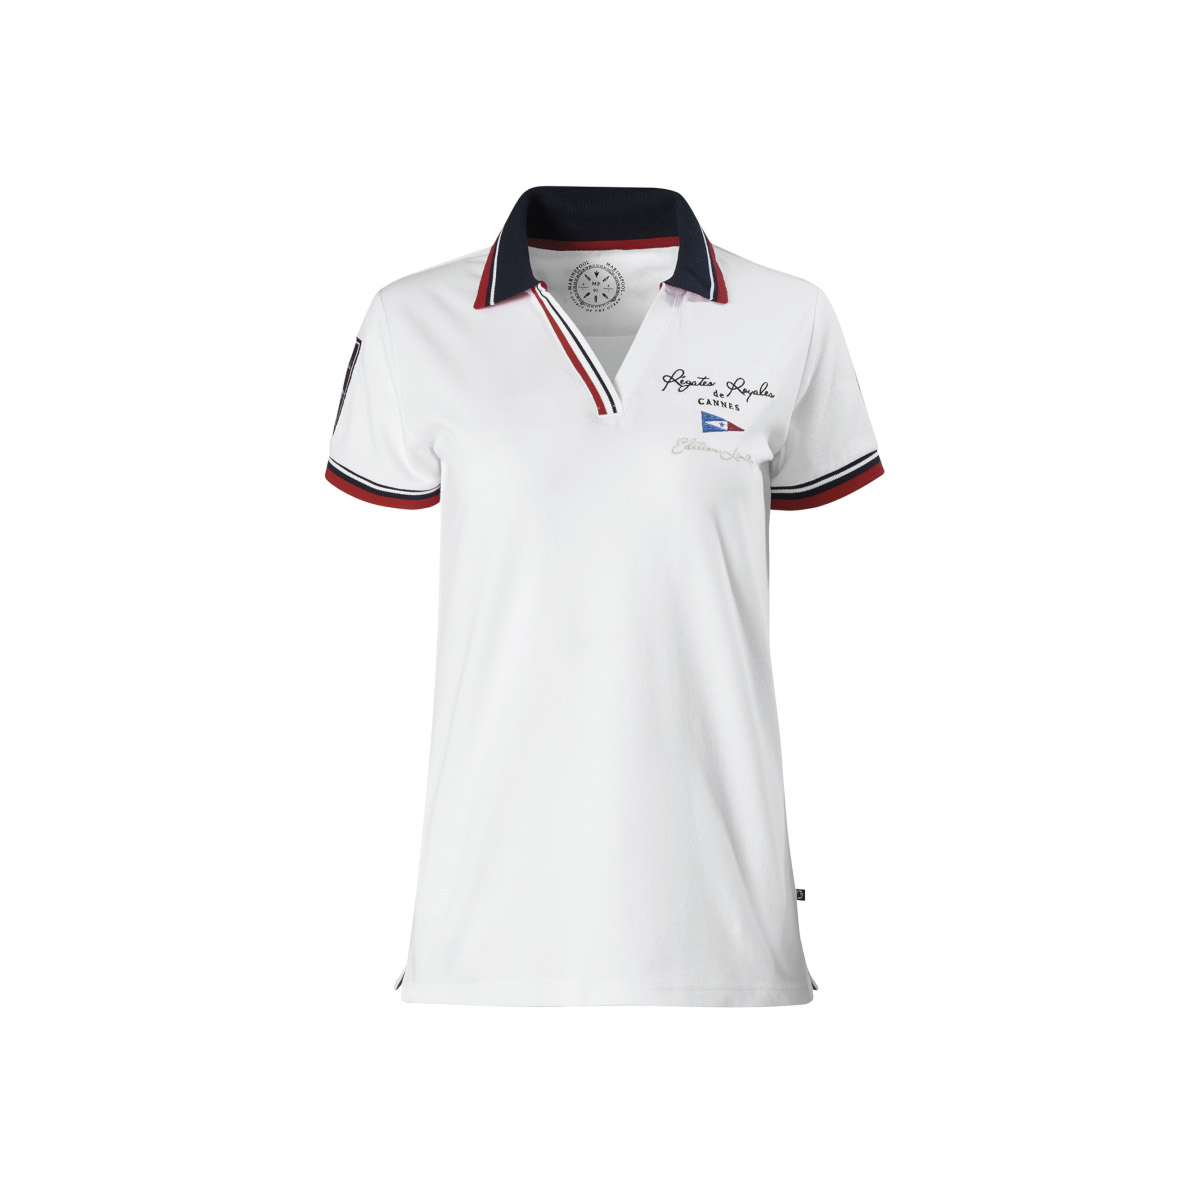 Marinepool RR Fine polo, femme - blanc, taille L